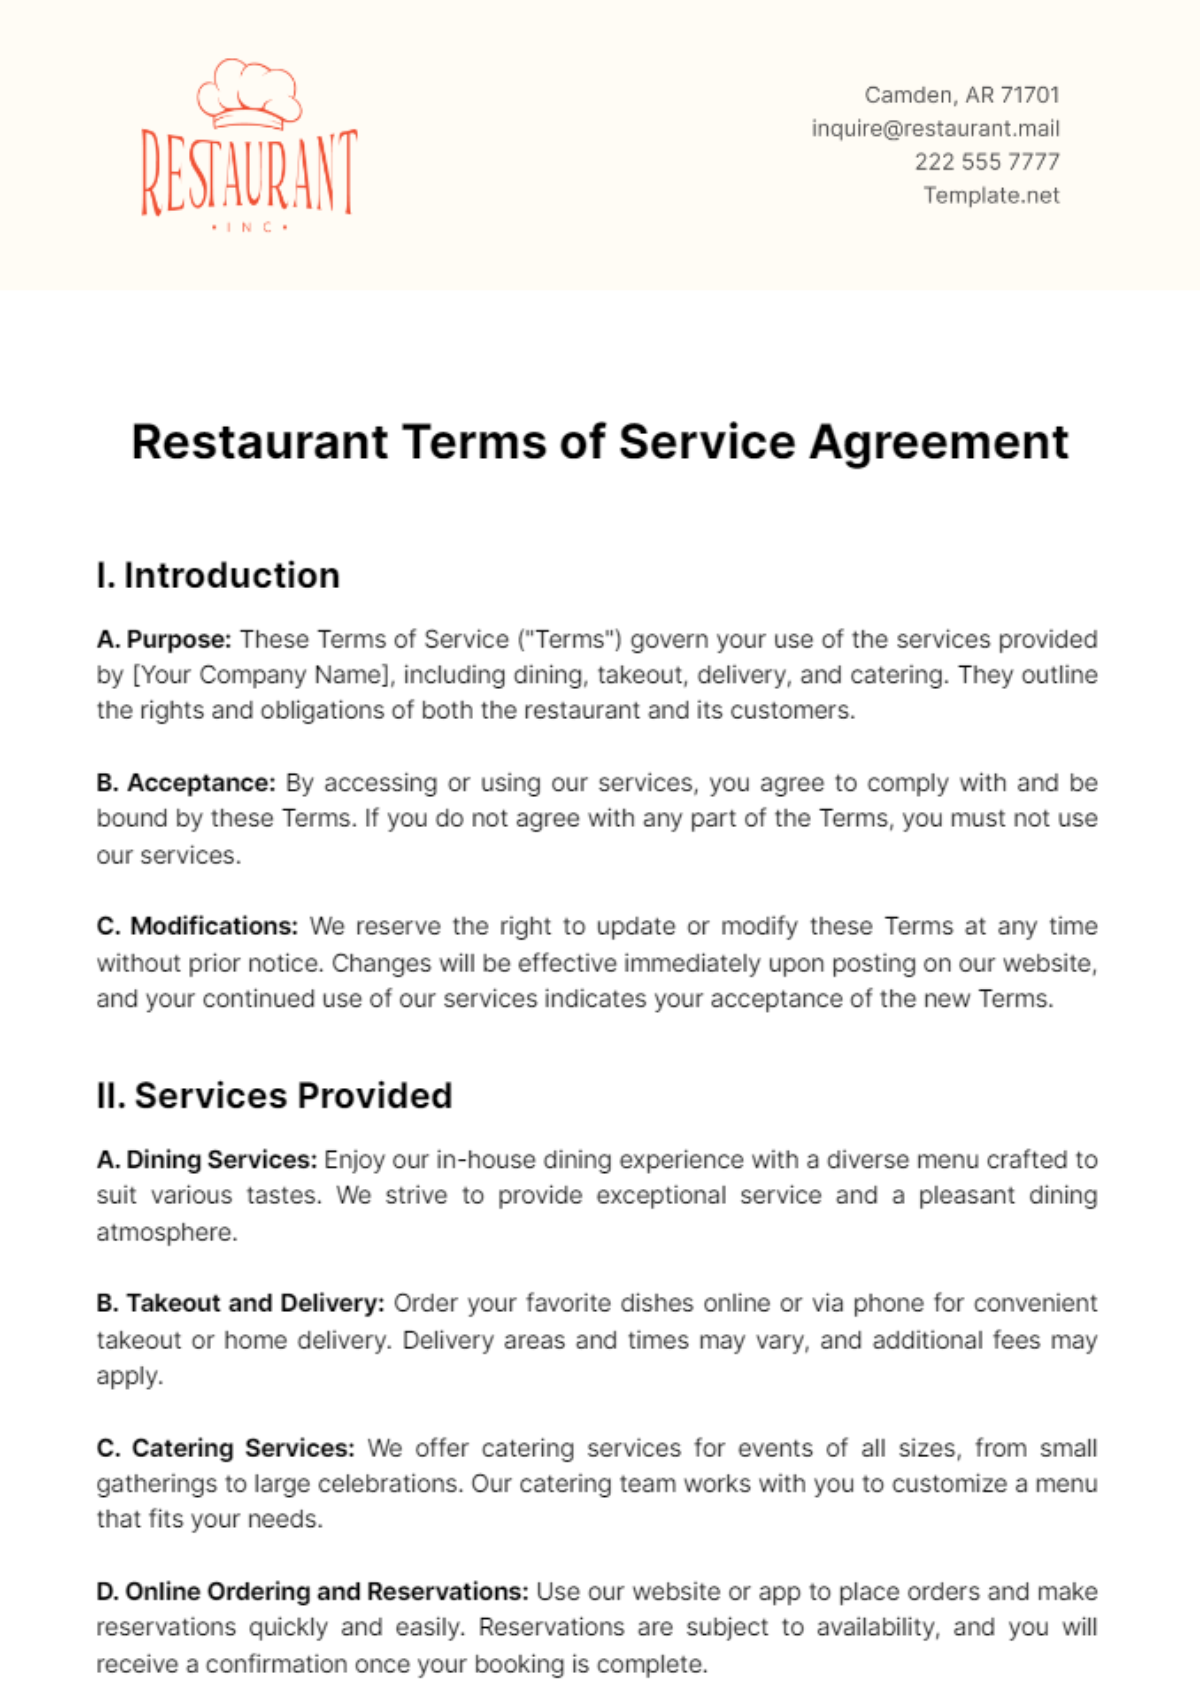 Restaurant Terms of Service Agreement Template